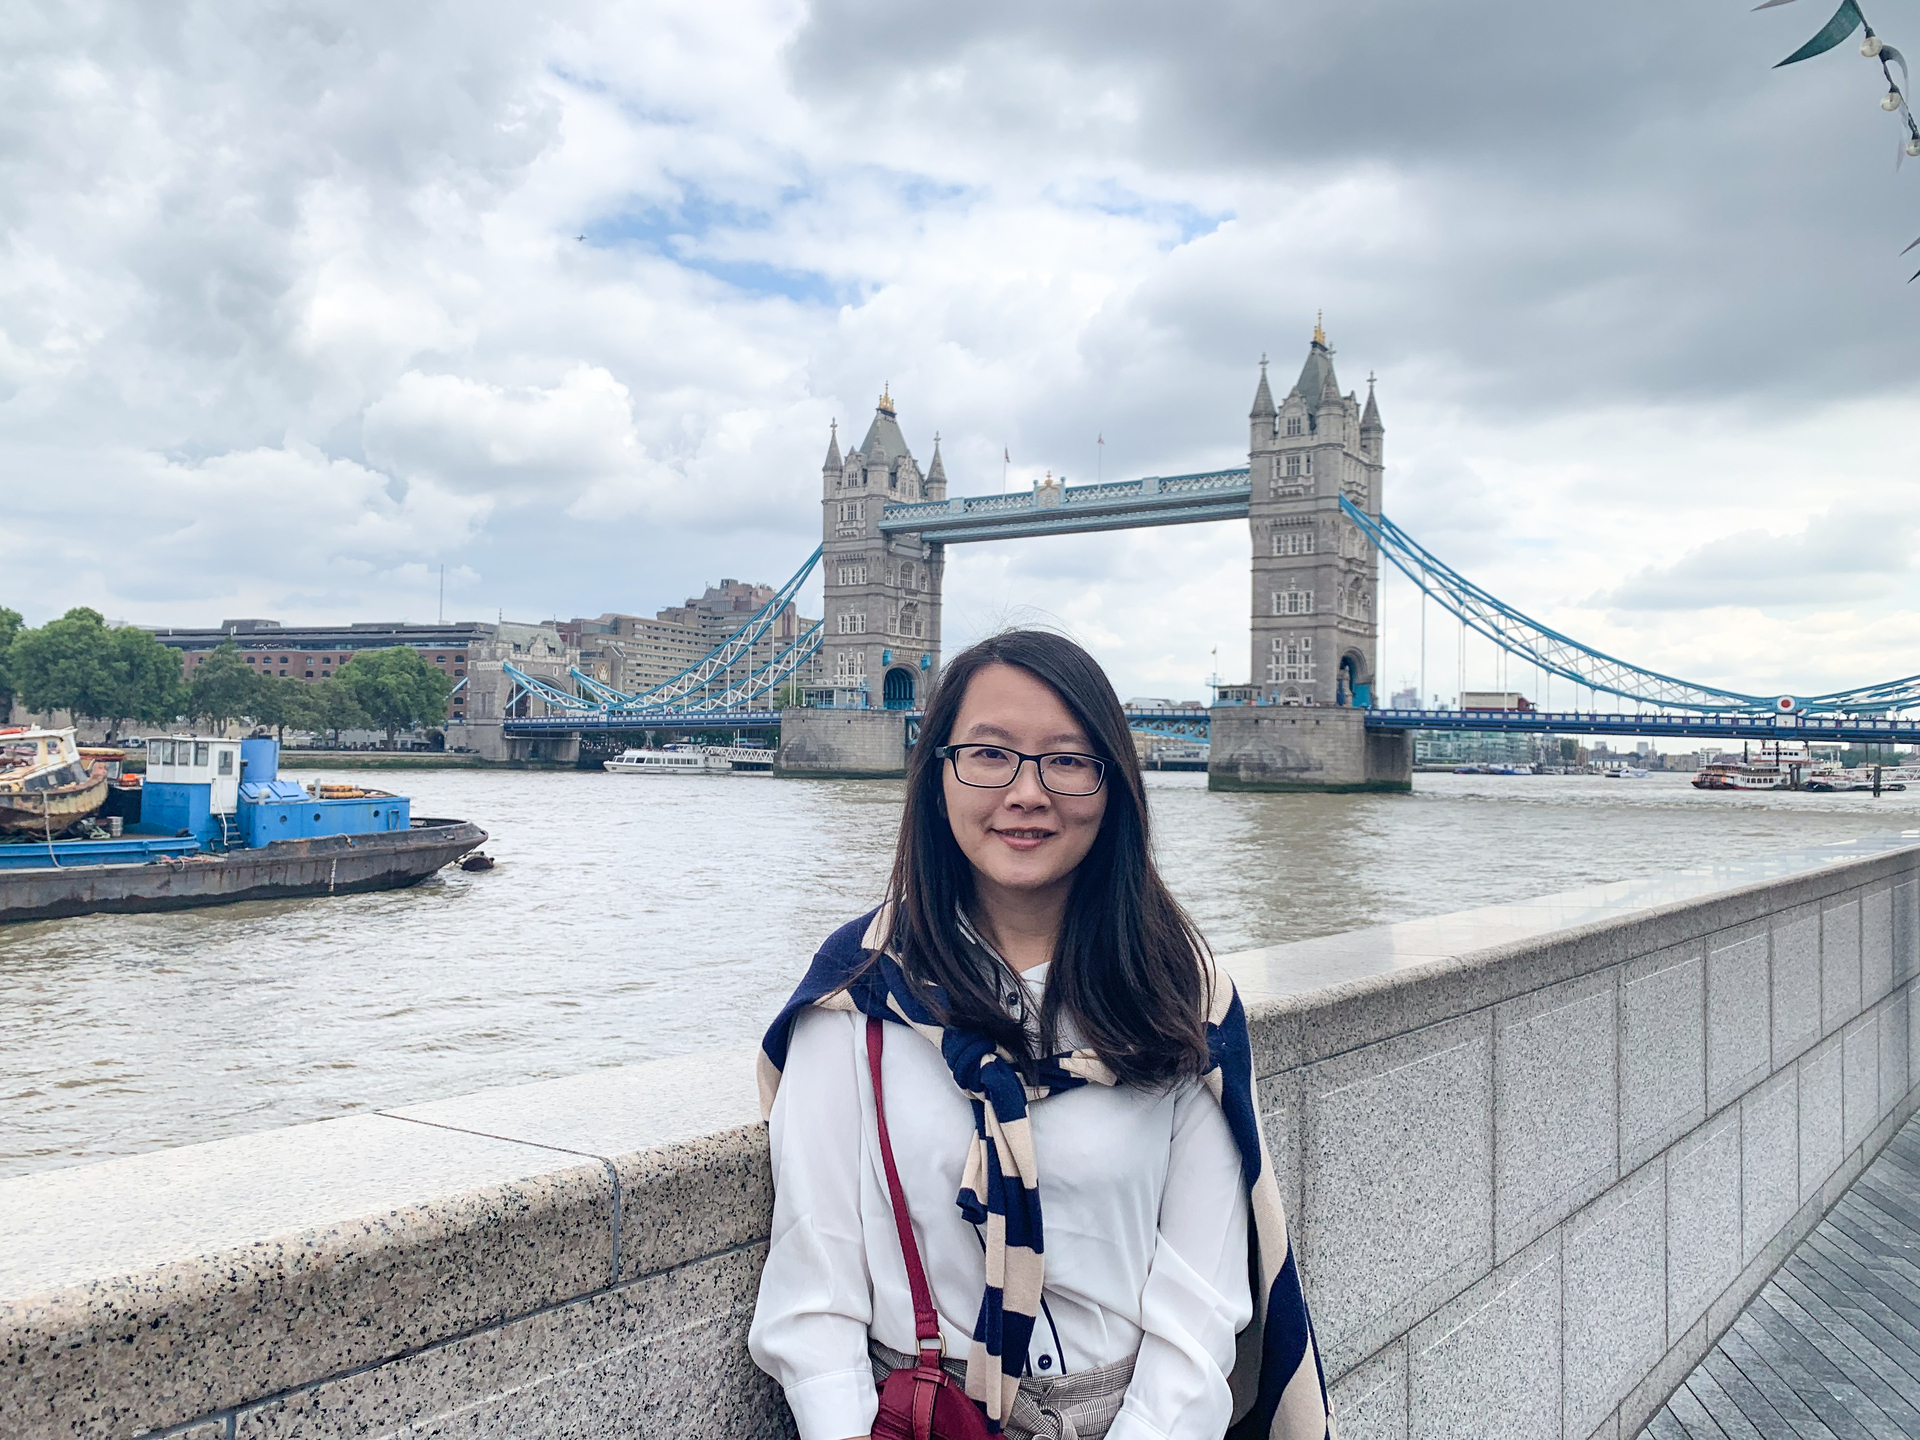 During her studies in England, Professor Wu traveled to different places, such as London Bridge, a famous attraction in England